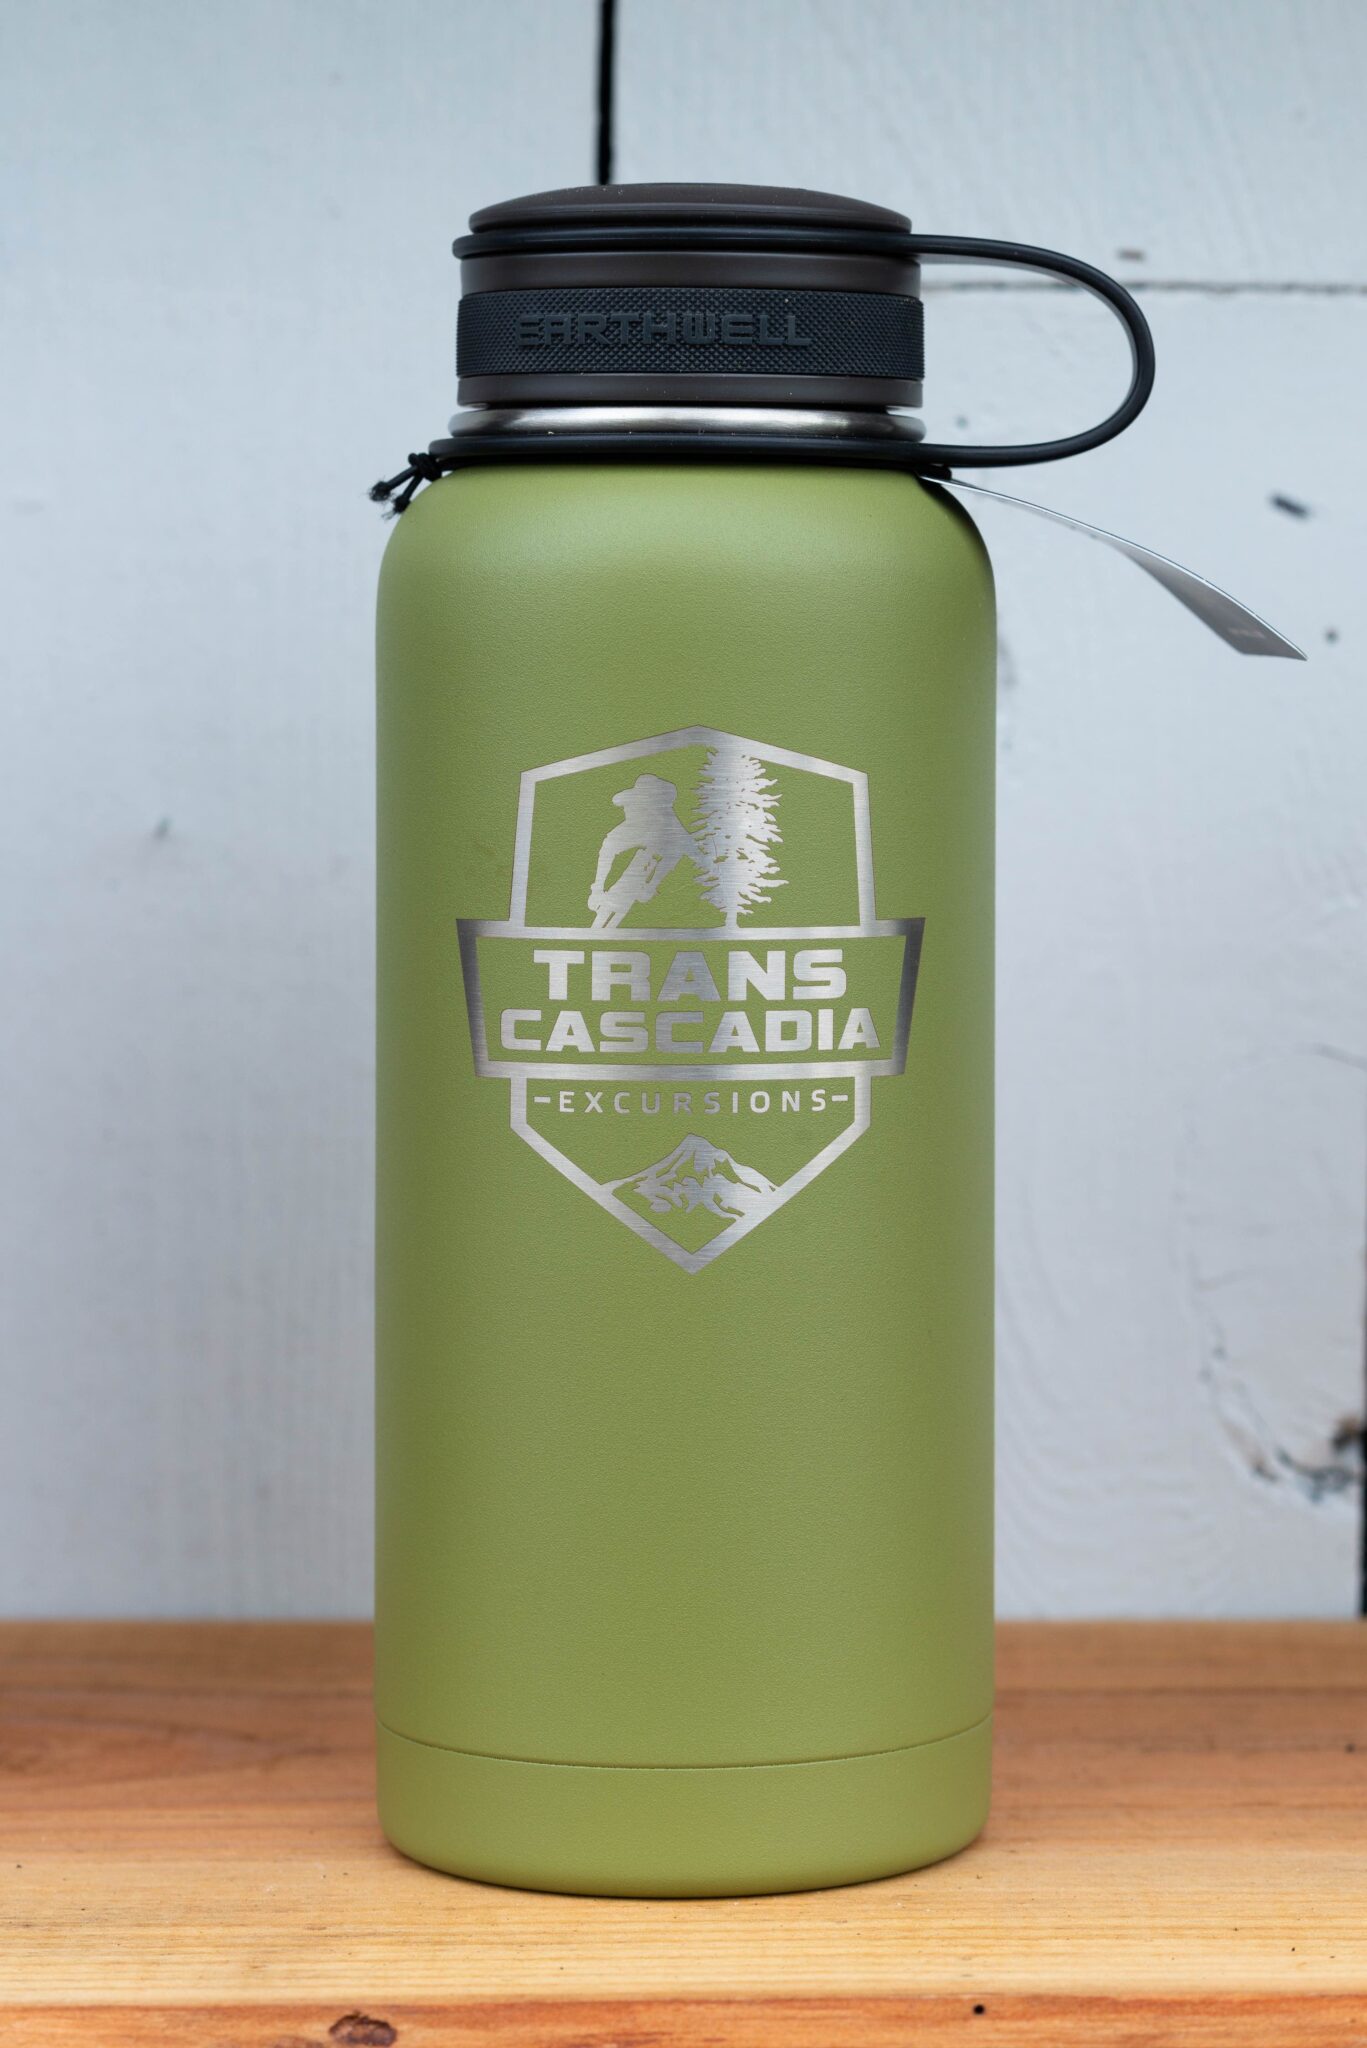 https://www.transcascadiaexcursions.com/wp-content/uploads/2021/08/TCE_Product-Water-Bottle_Small_Green-scaled.jpeg